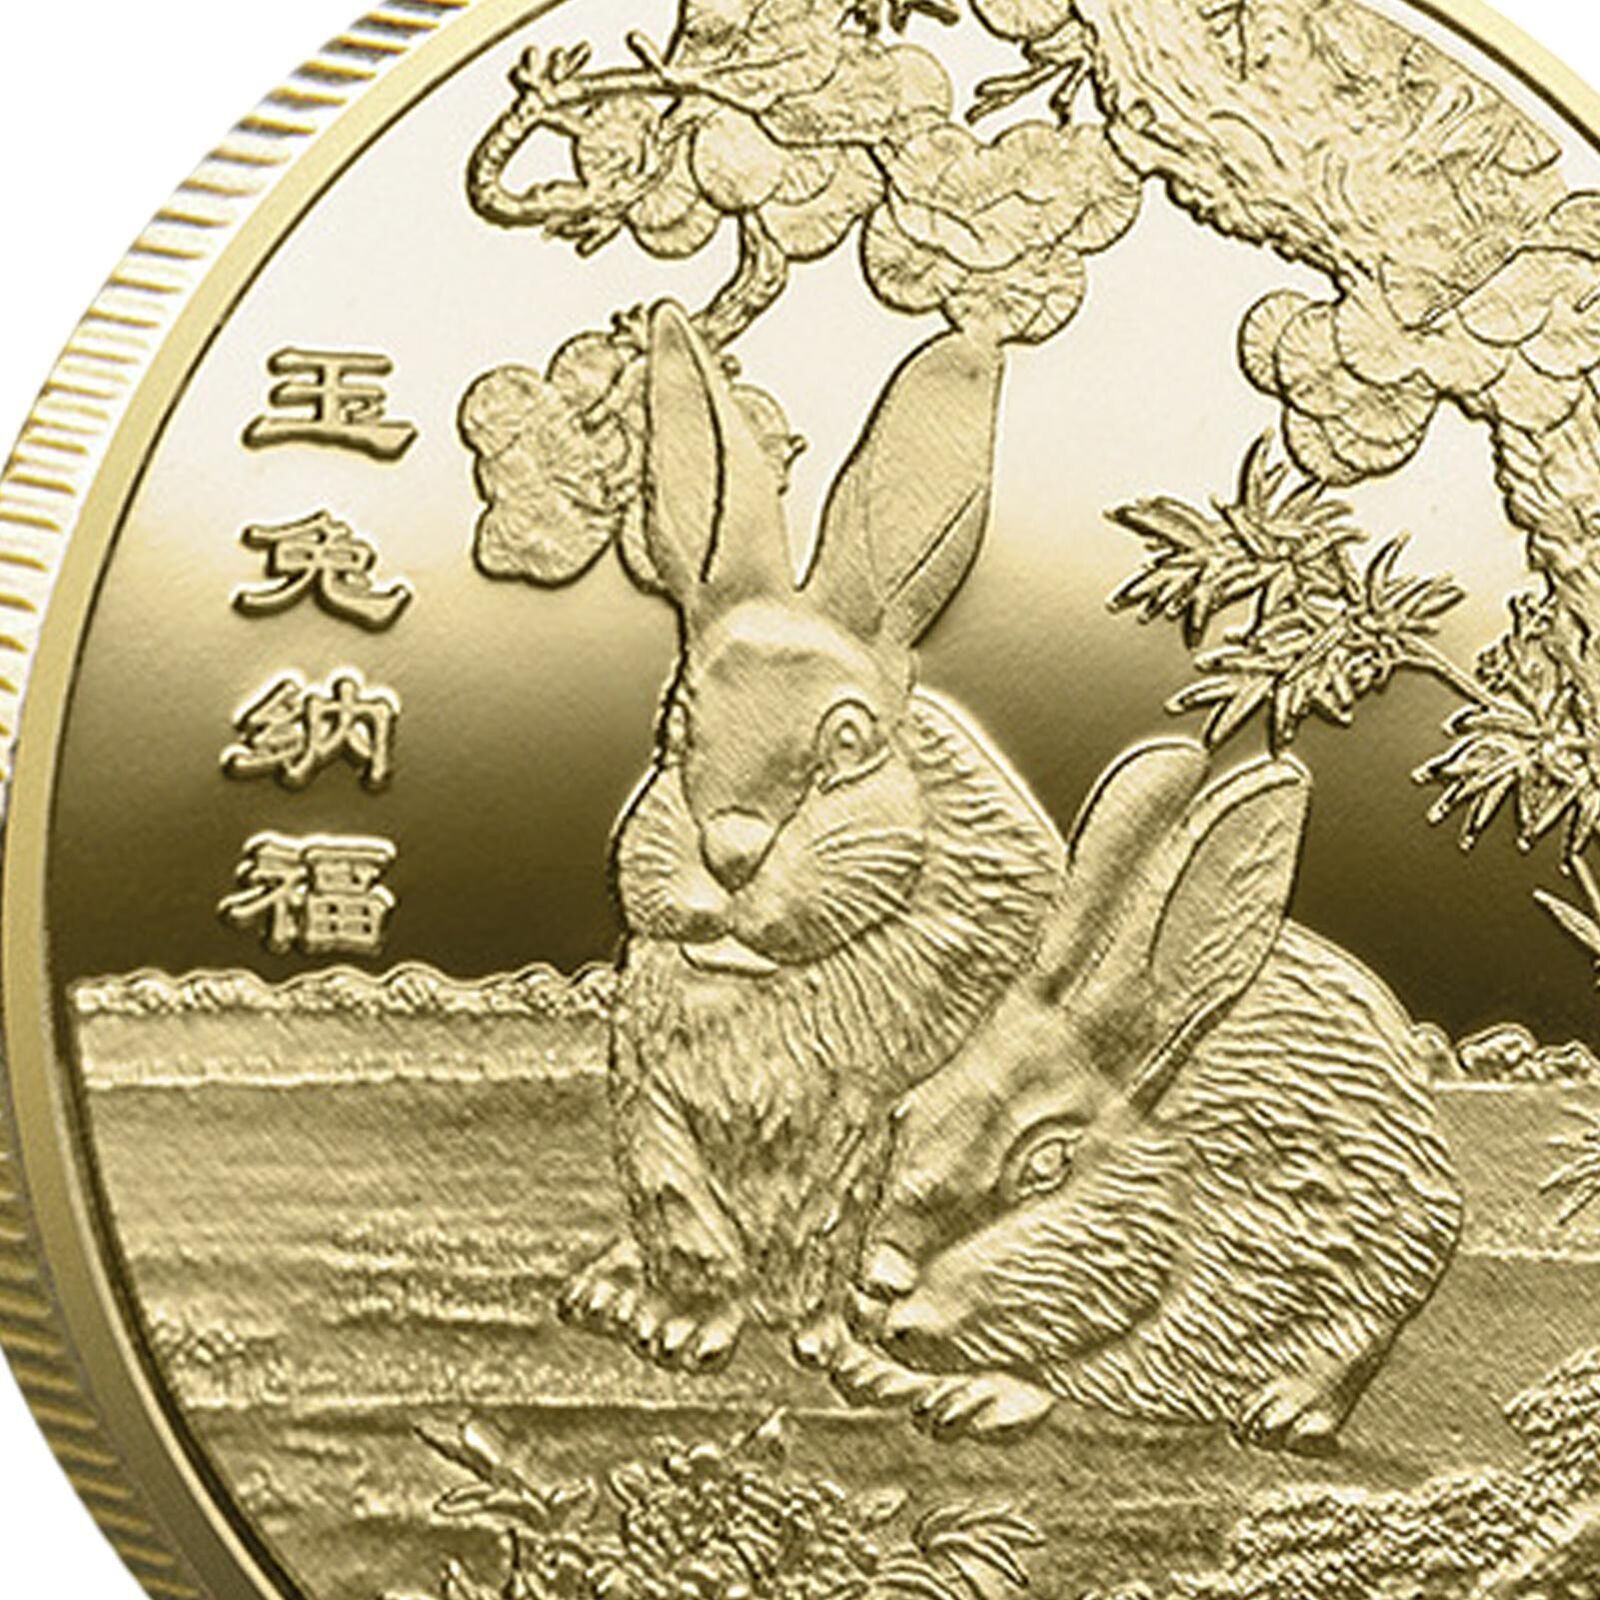 New Chinese Zodiac Year of The Rabbit 2023 Commemorative Coin in Capsule Gold